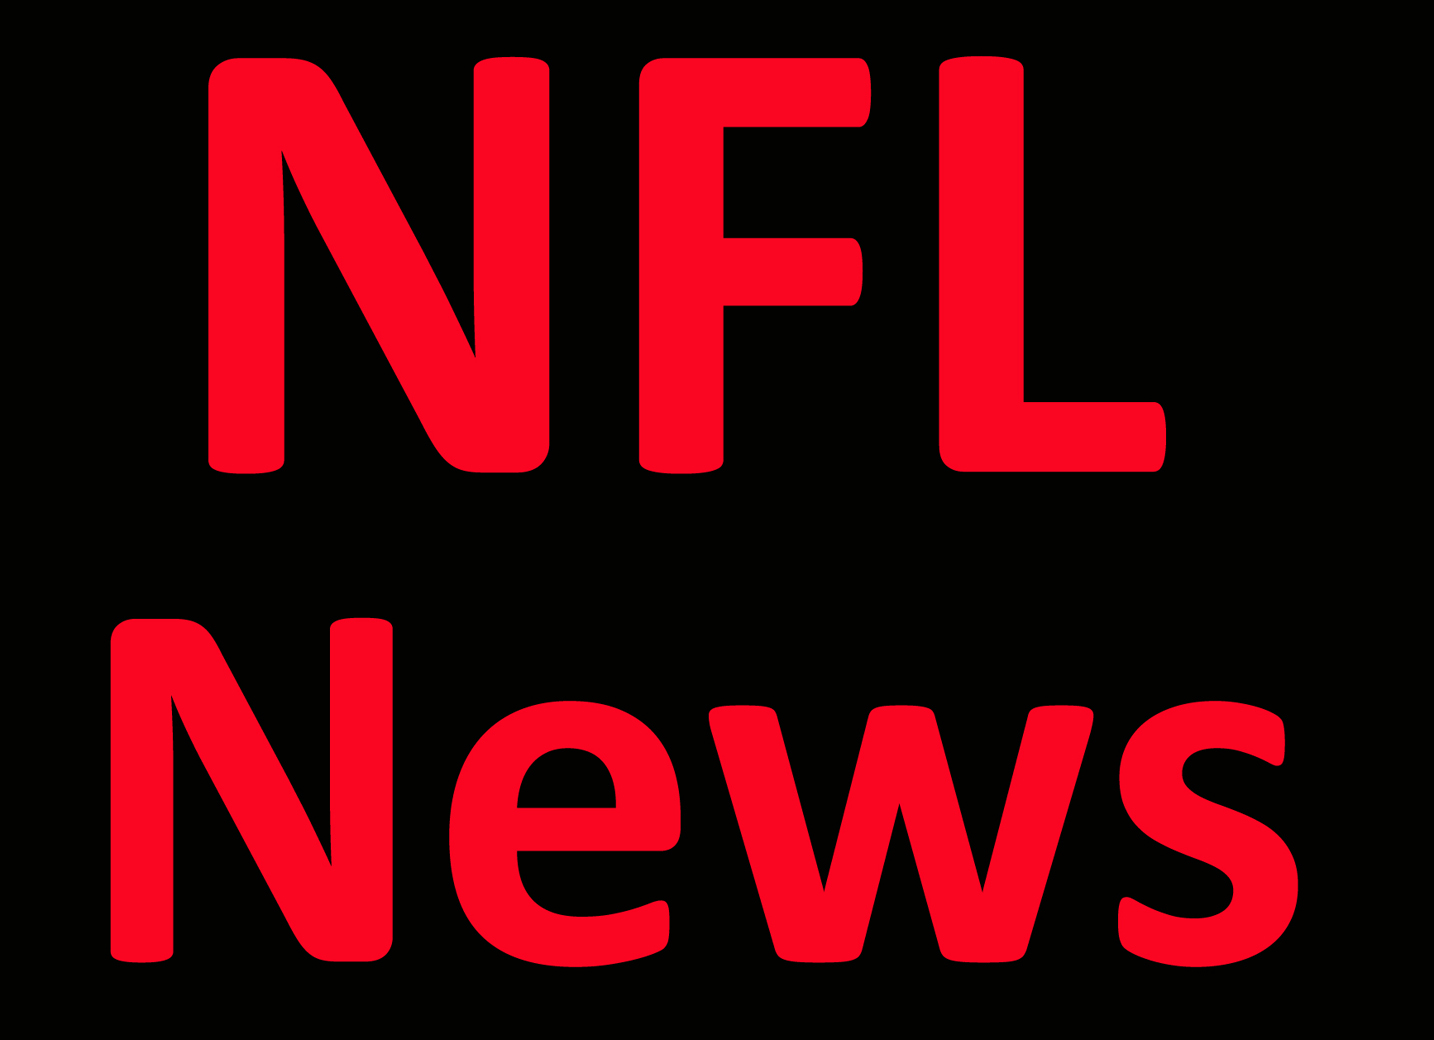 NFL News: ESPN Fantasy Football: New game features for 2022, including keepers and scoring options Per Report